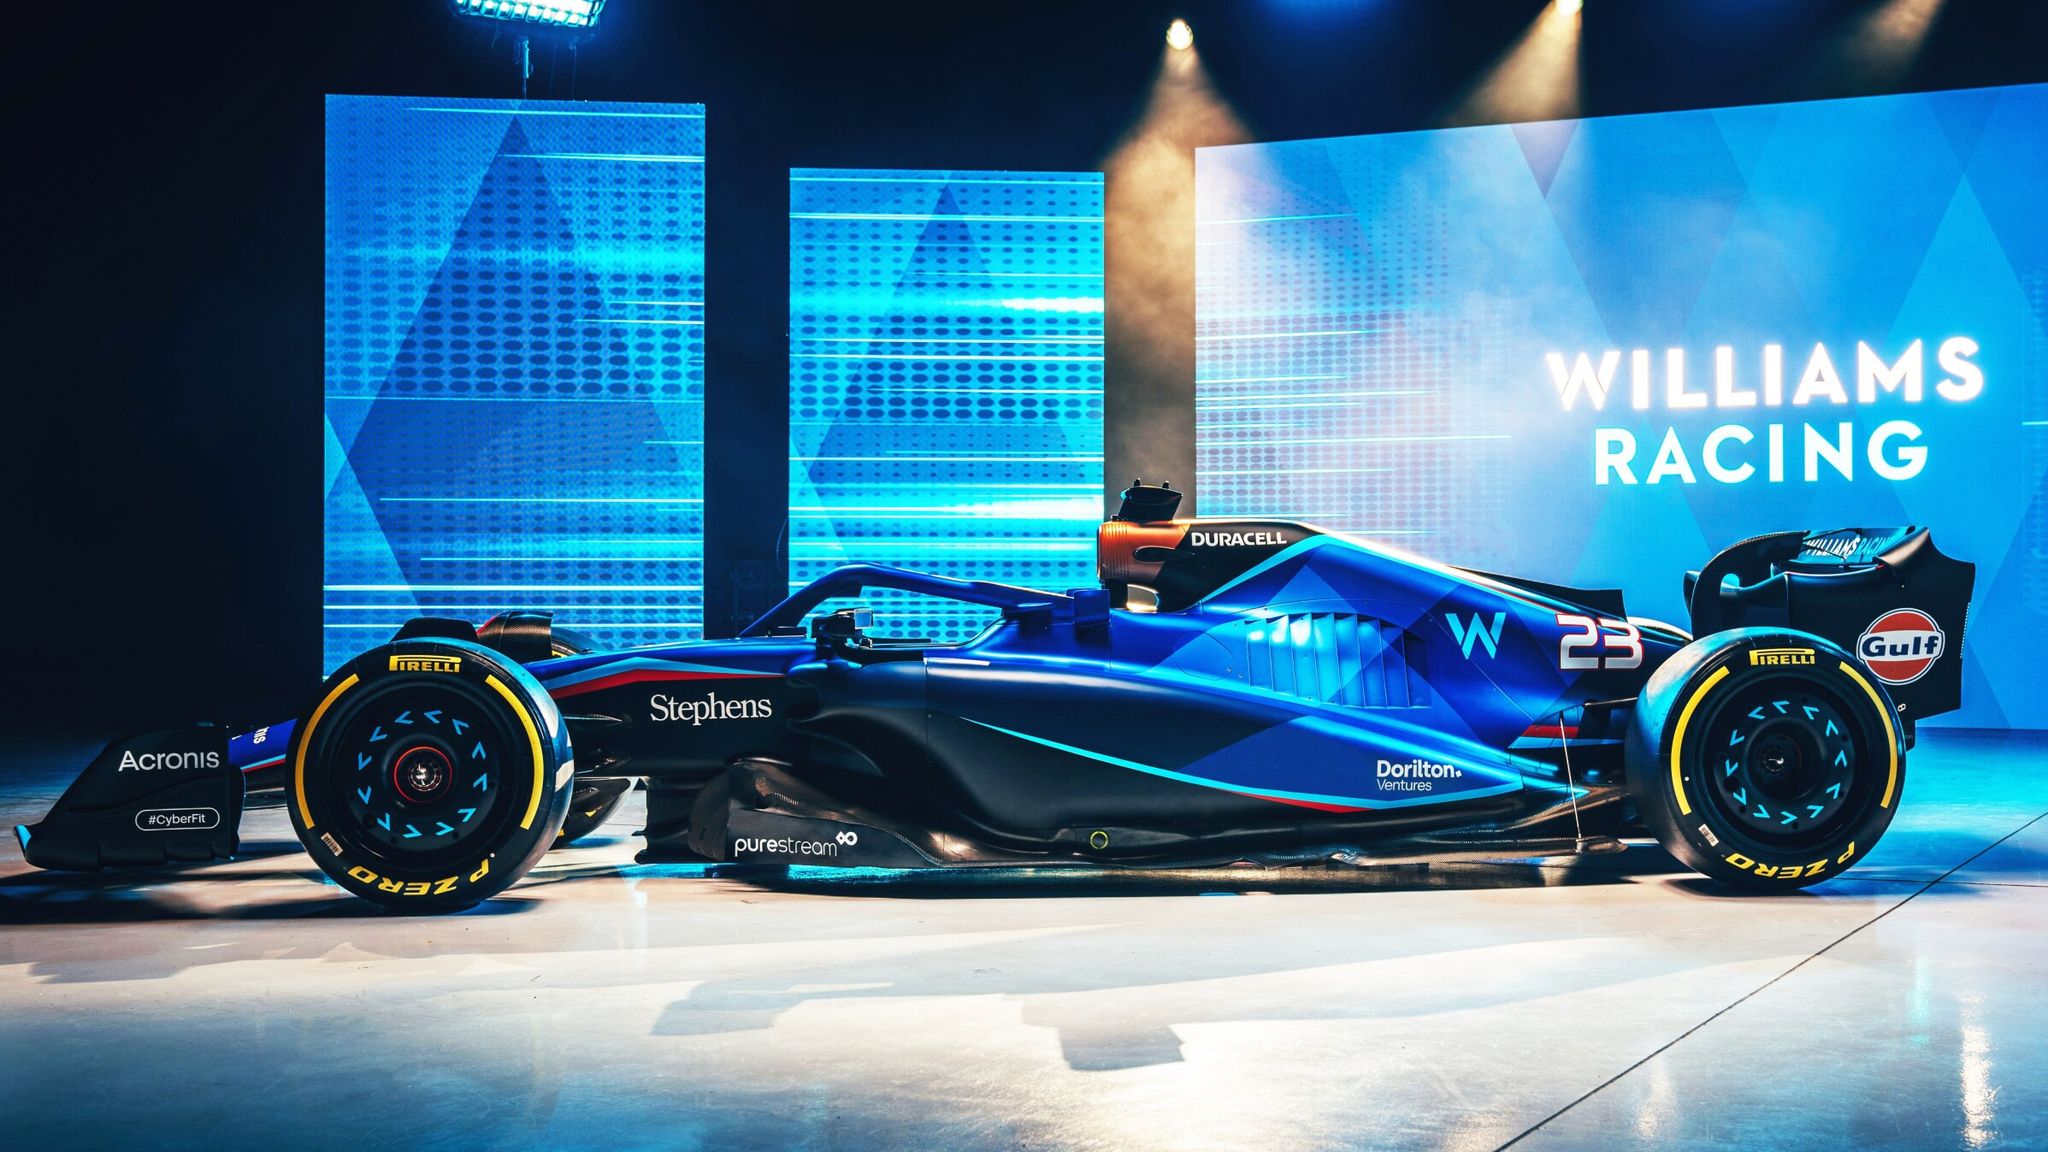 Formula 1 launches Williams reveal sleek new car livery and Gulf Oil partnership for 2023 season F1 News